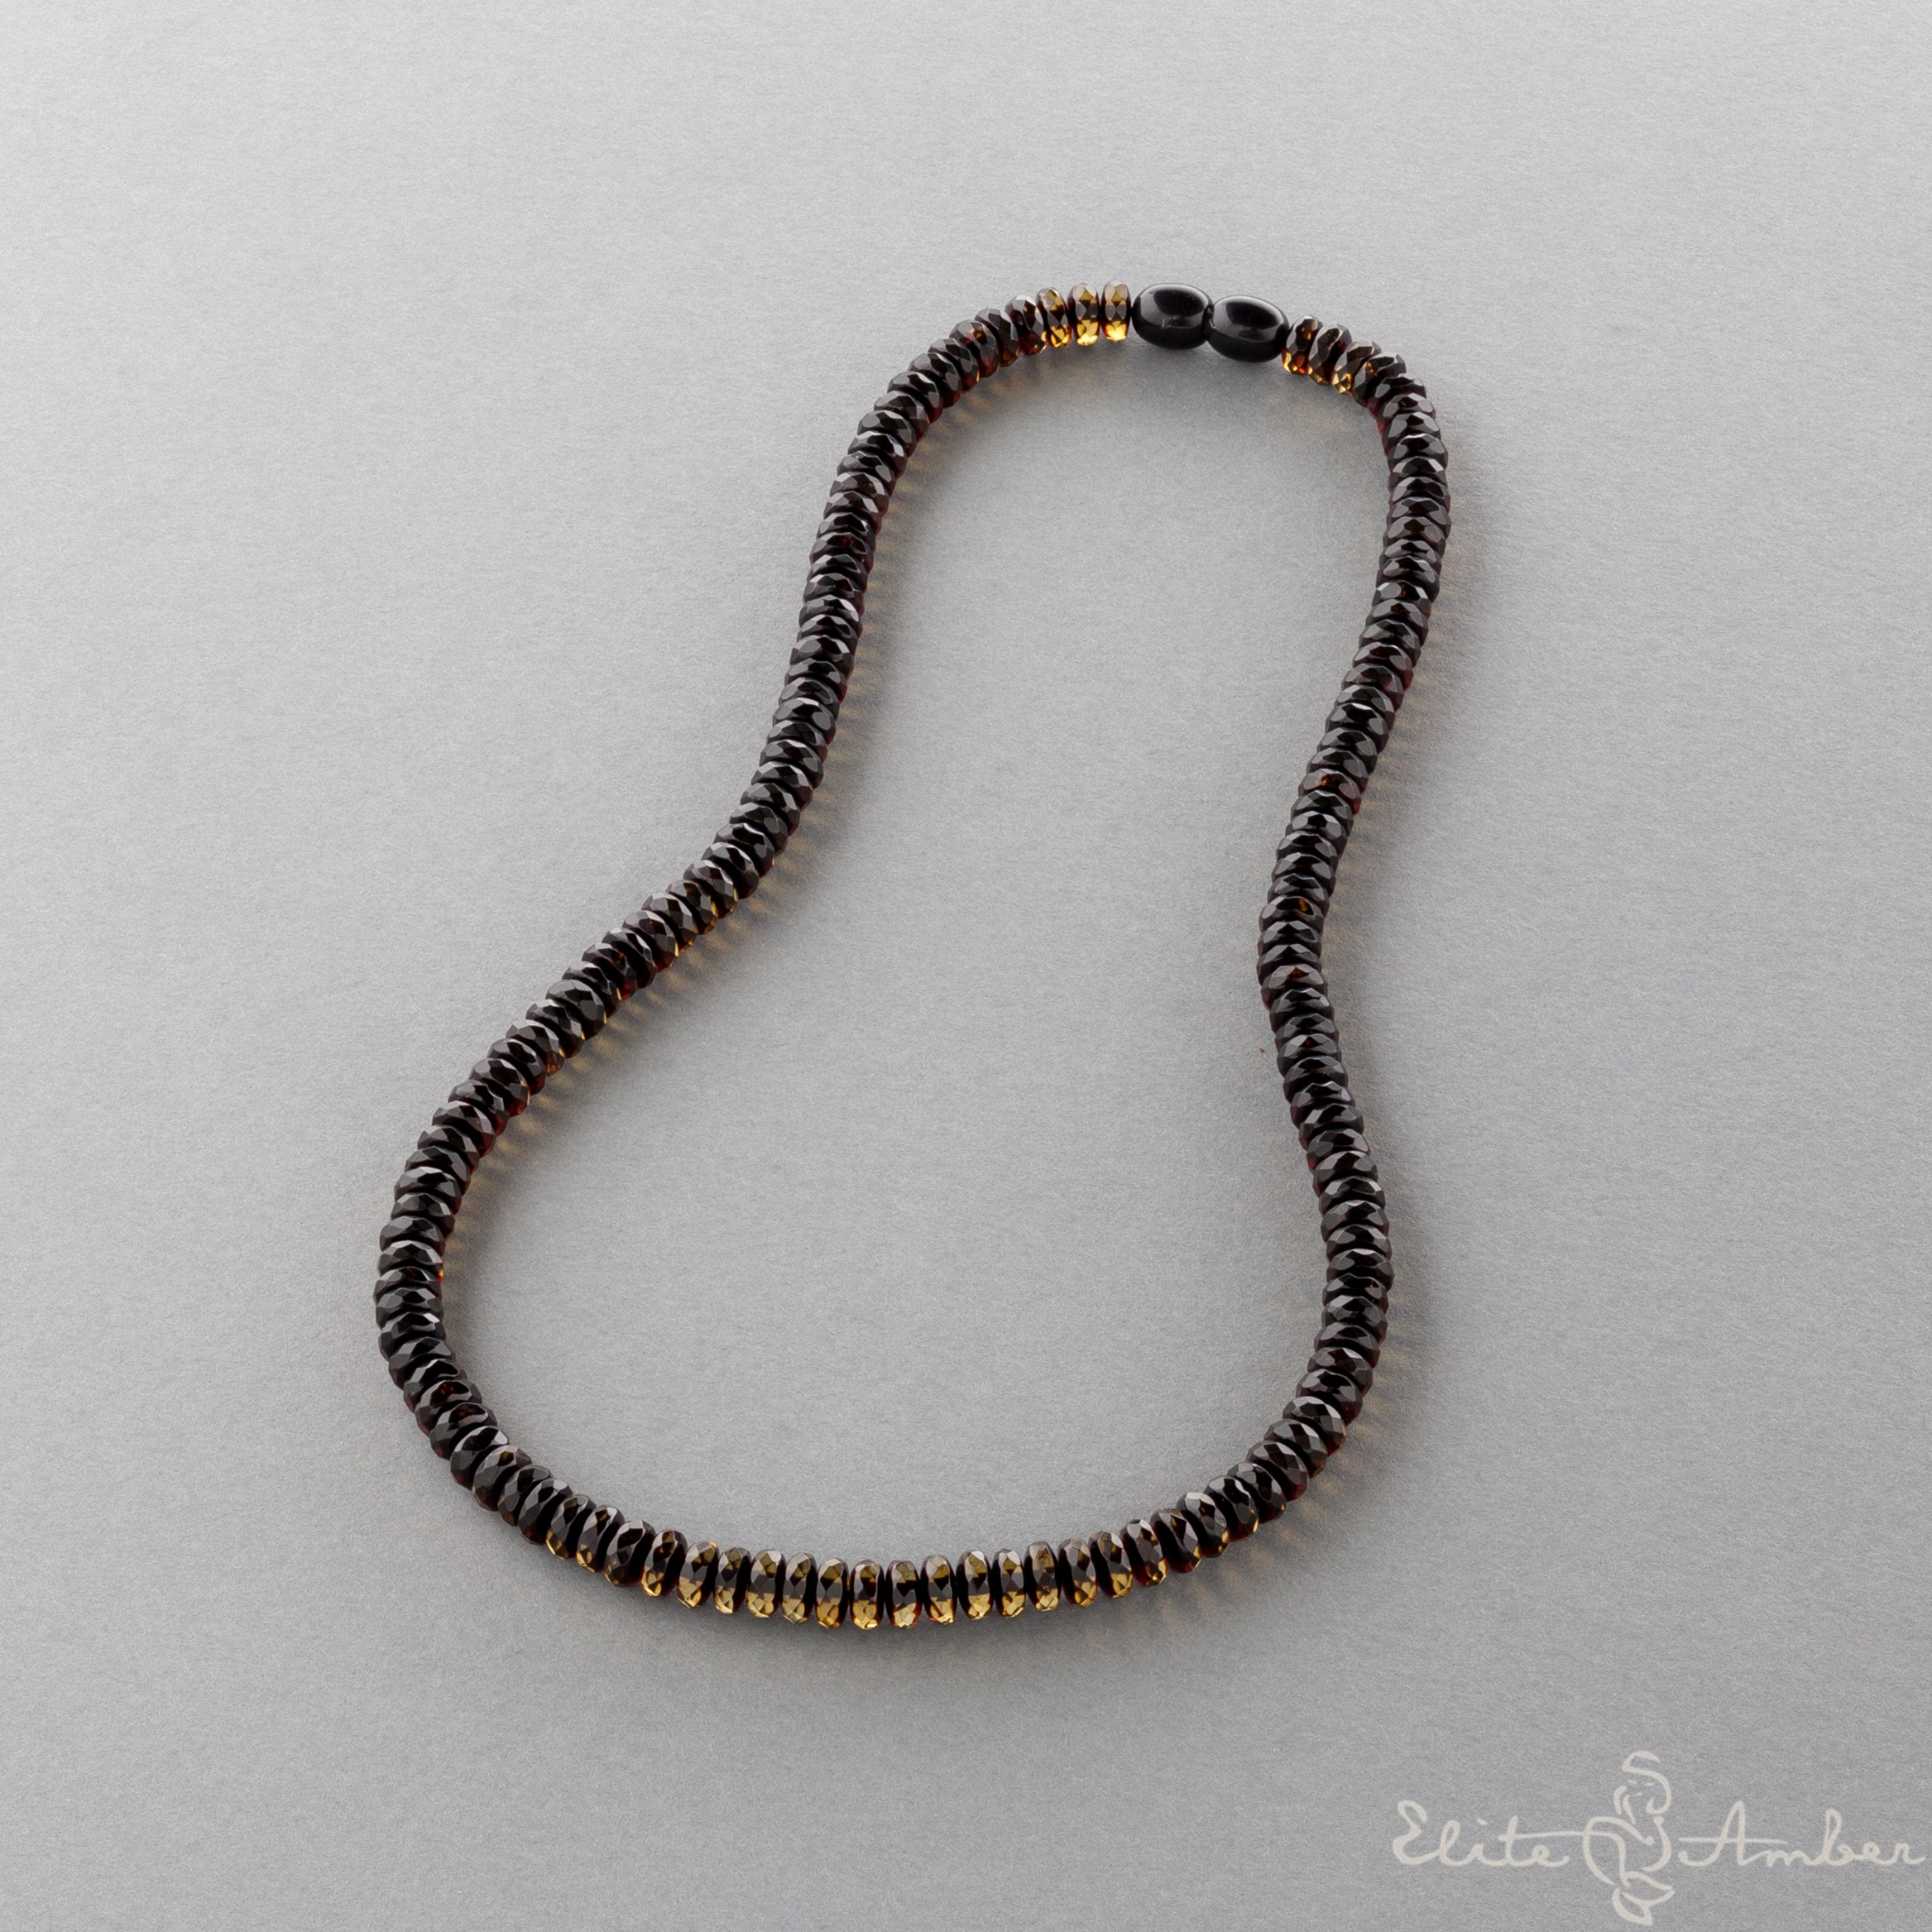 Amber necklace "Glossy black moon"